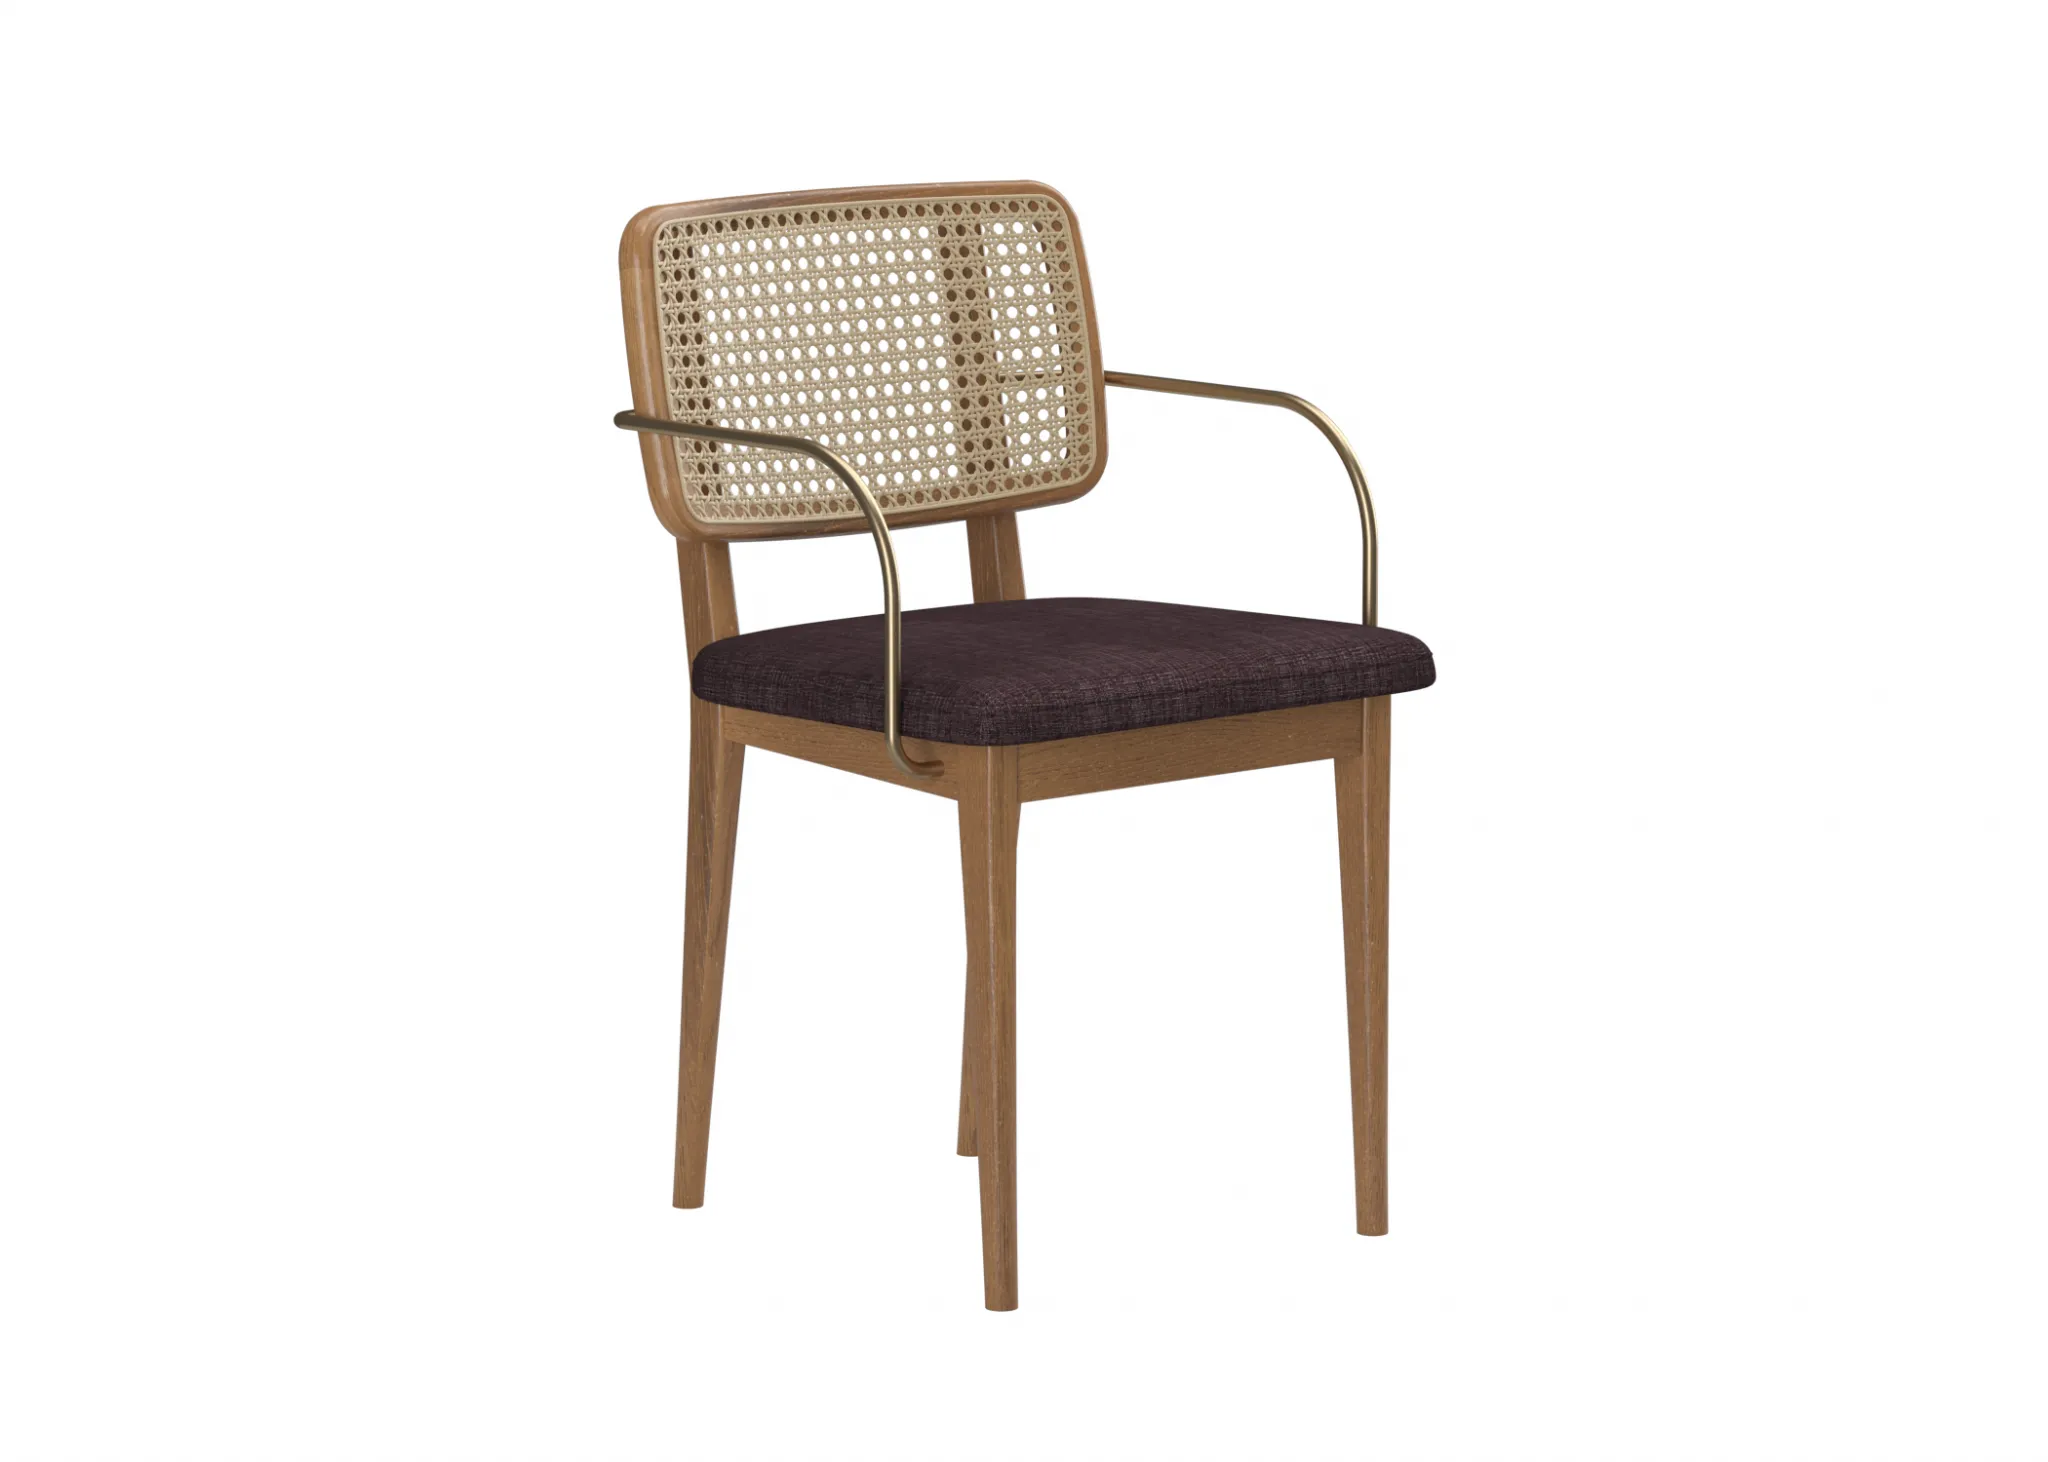 FURNITURE 3D MODELS – CHAIRS – 0034